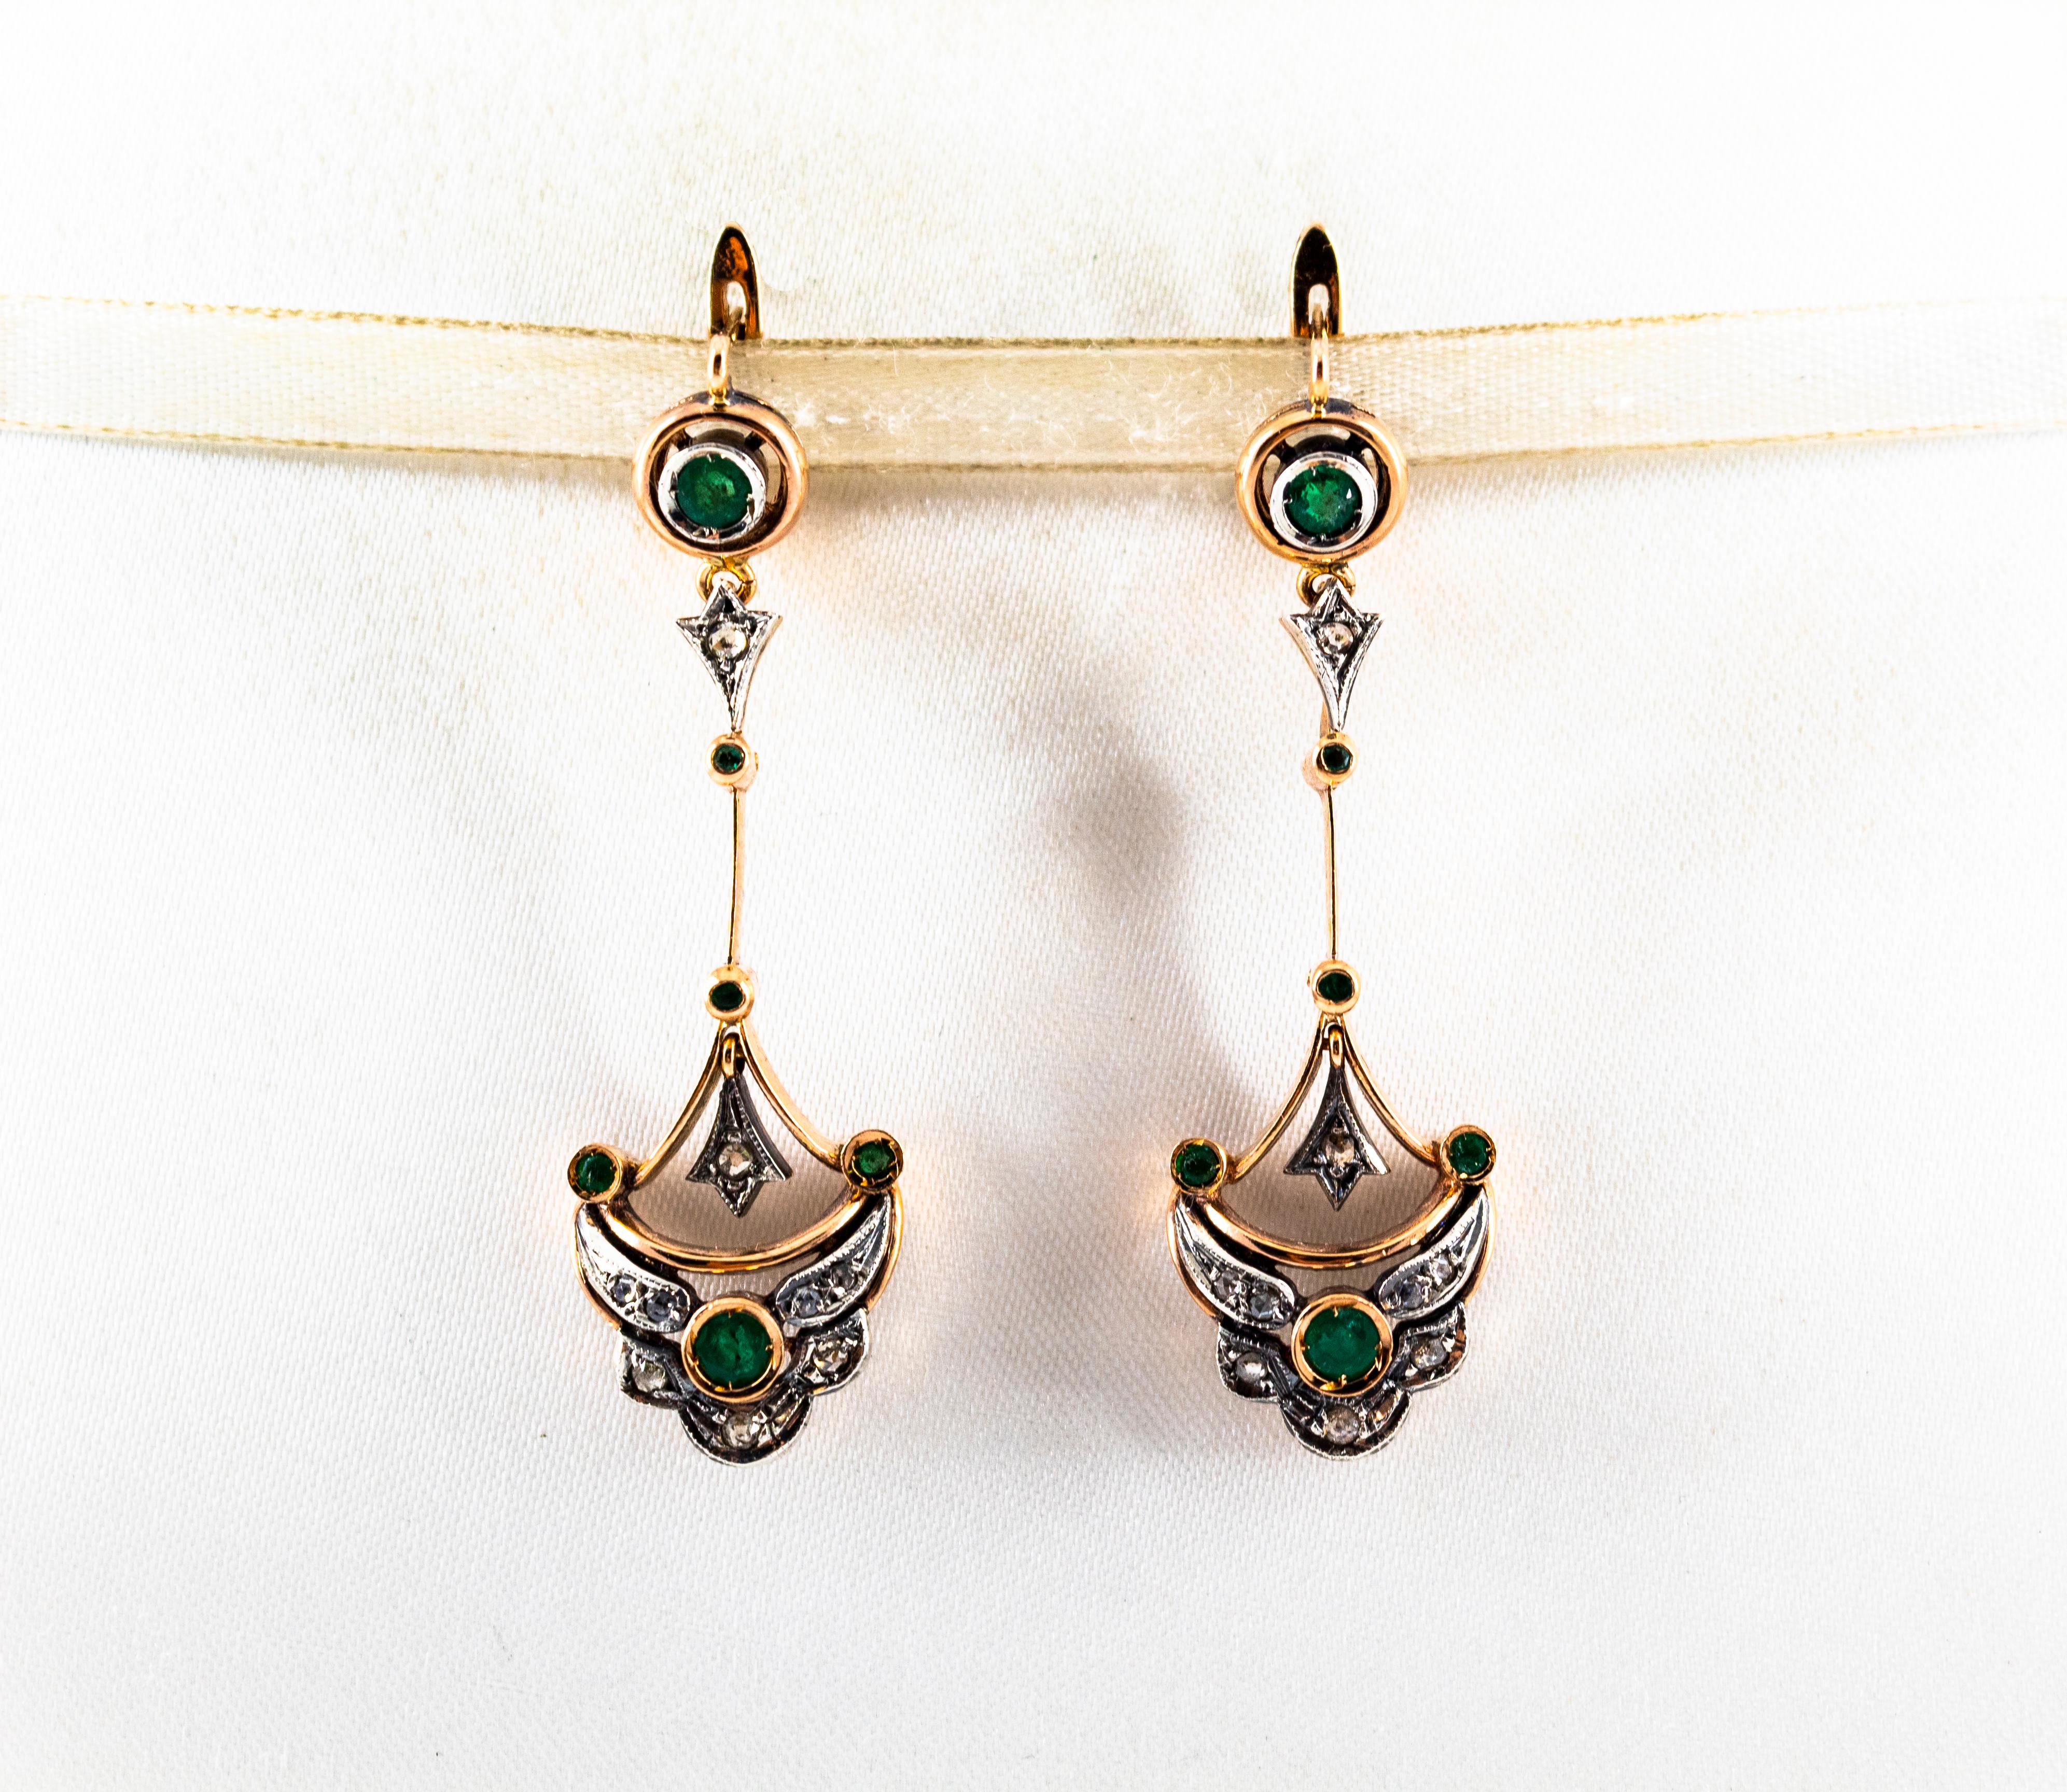 These Lever-Back Earrings are made of 9K Yellow Gold and Sterling Silver.
These Earrings have 0.20 Carats of White Rose Cut Diamonds.
These Earrings have also 0.70 Carat of Emeralds.
These Earrings are available also with Rubies or Blue